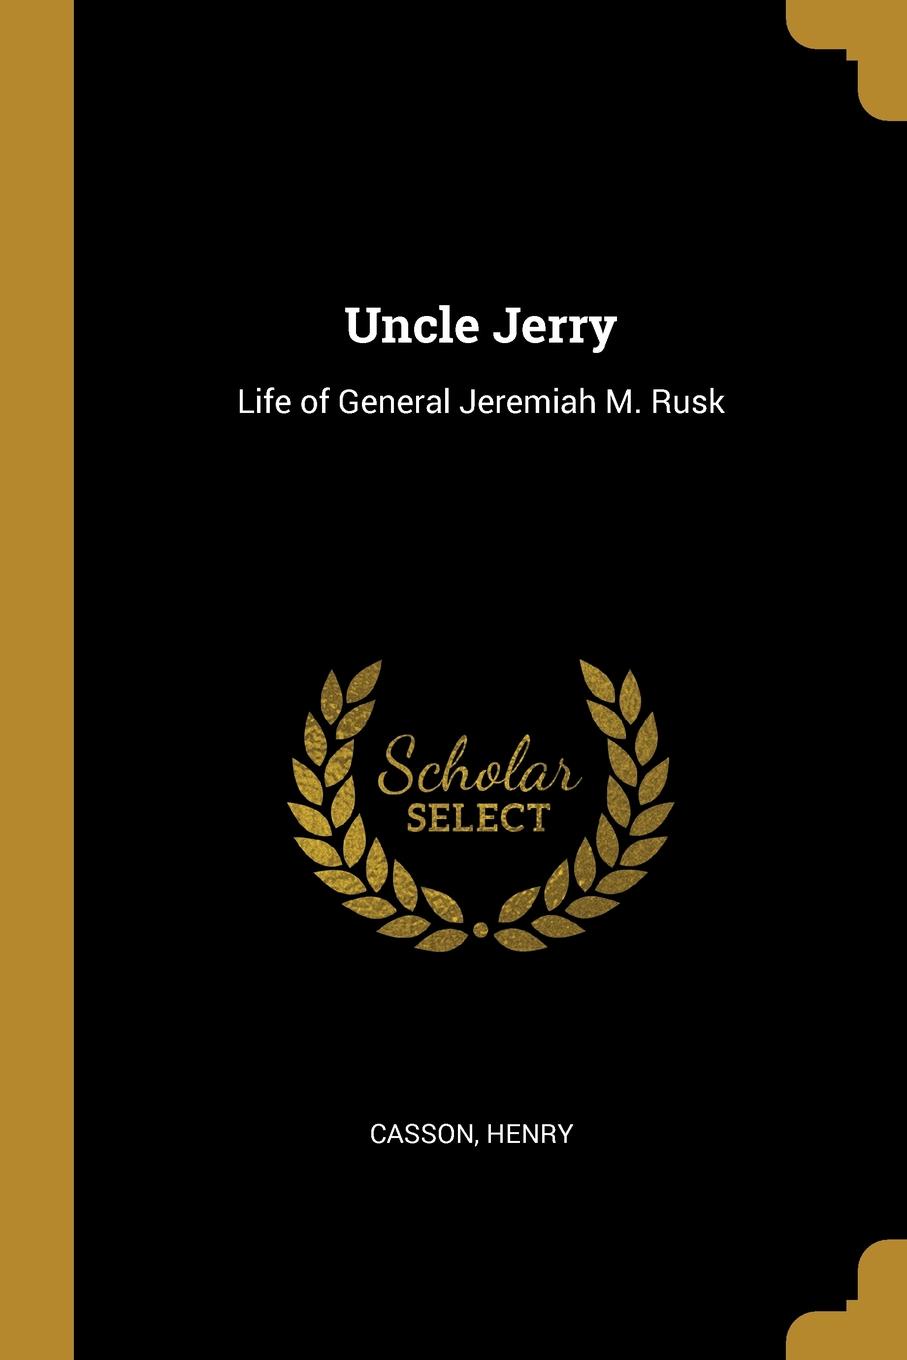 Uncle Jerry. Life of General Jeremiah M. Rusk